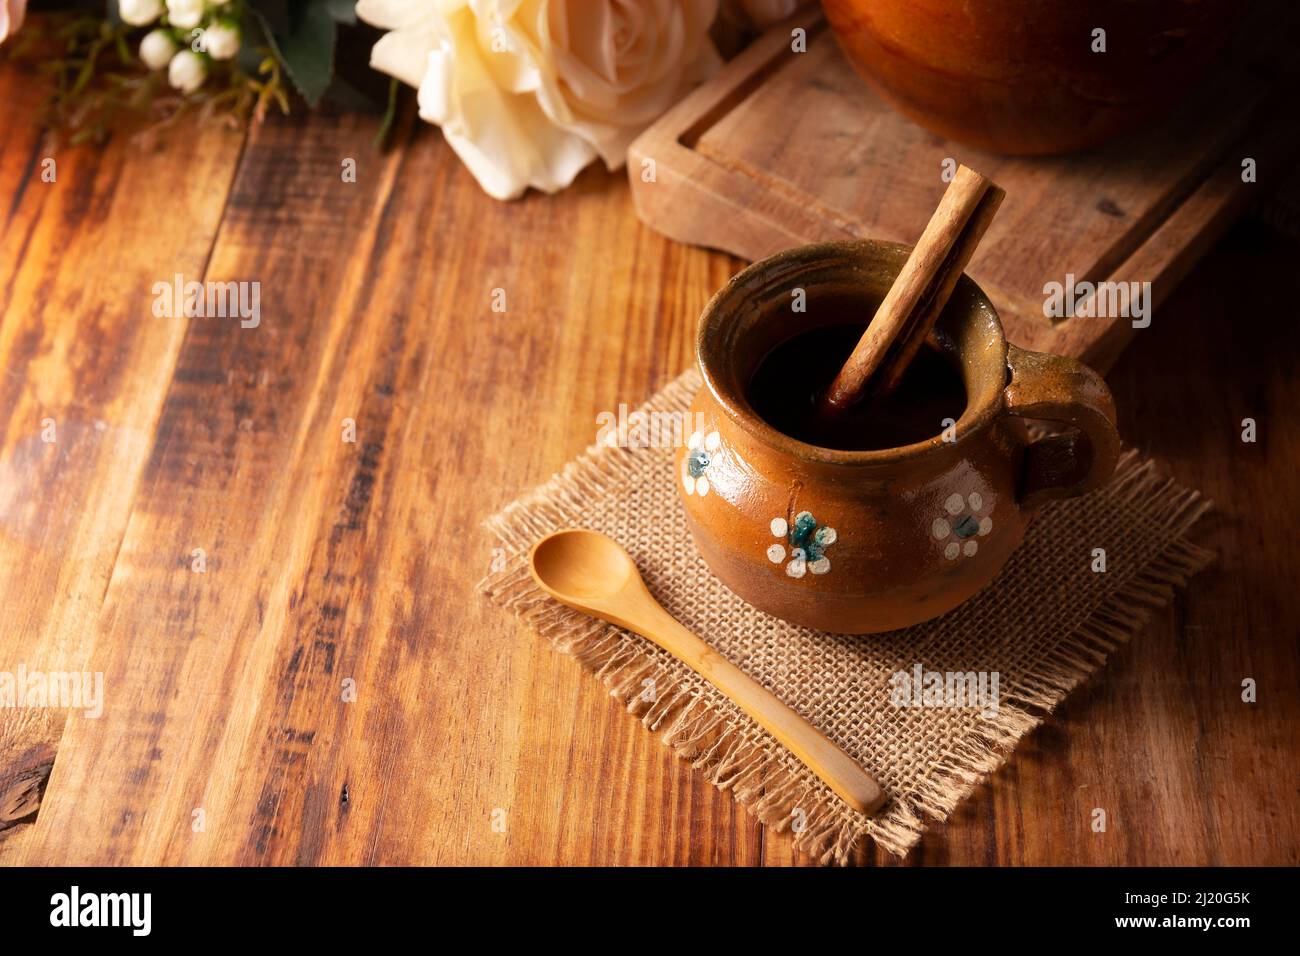 Authentic homemade mexican coffee (cafe de olla) served in traditional clay mug (Jarrito de barro) on rustic wooden table. Stock Photo